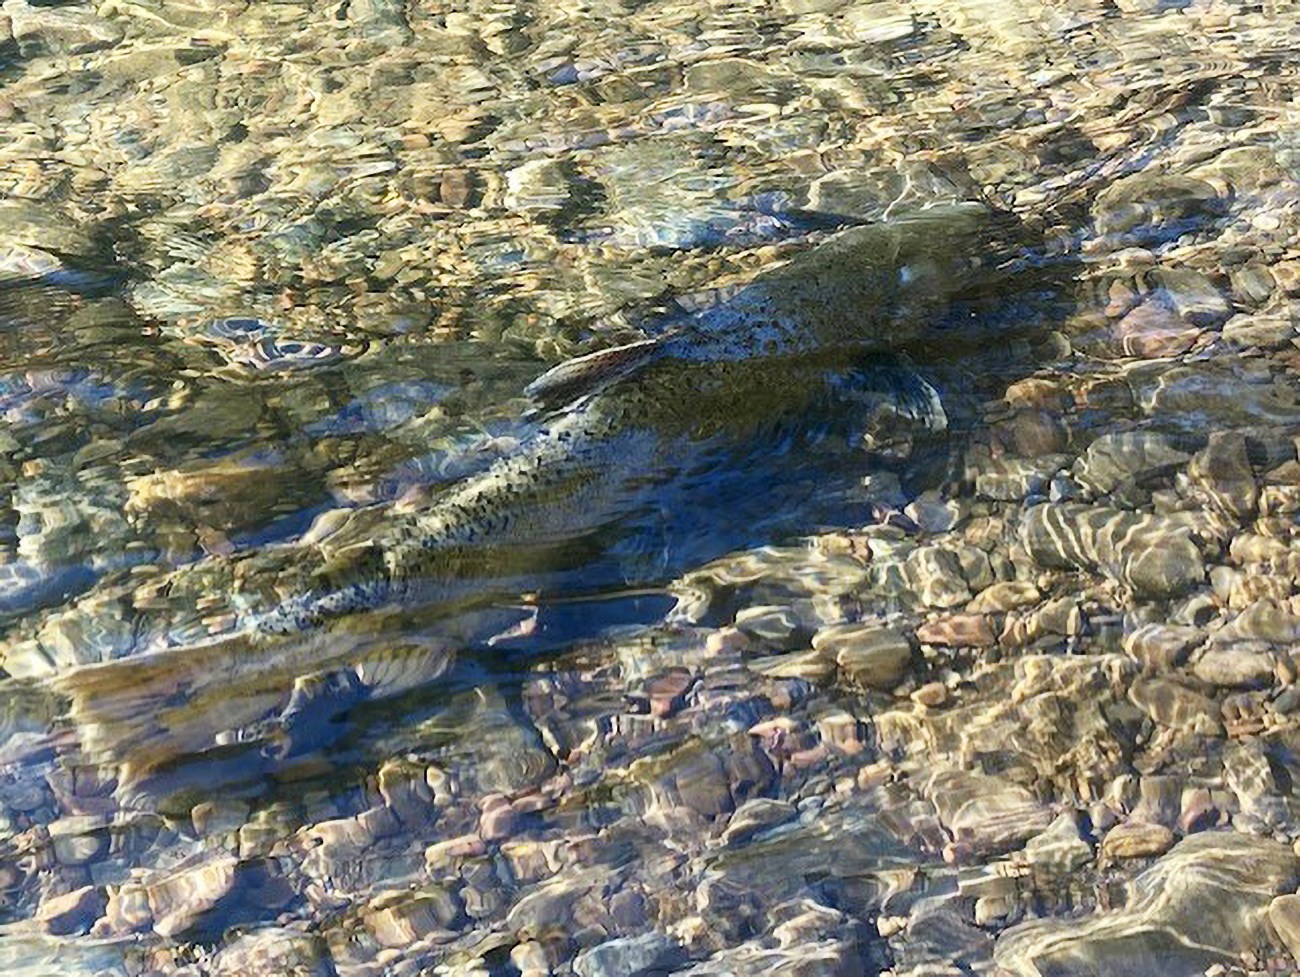 Large fish swimming against the current of a clear, shallow, gravelly creek.